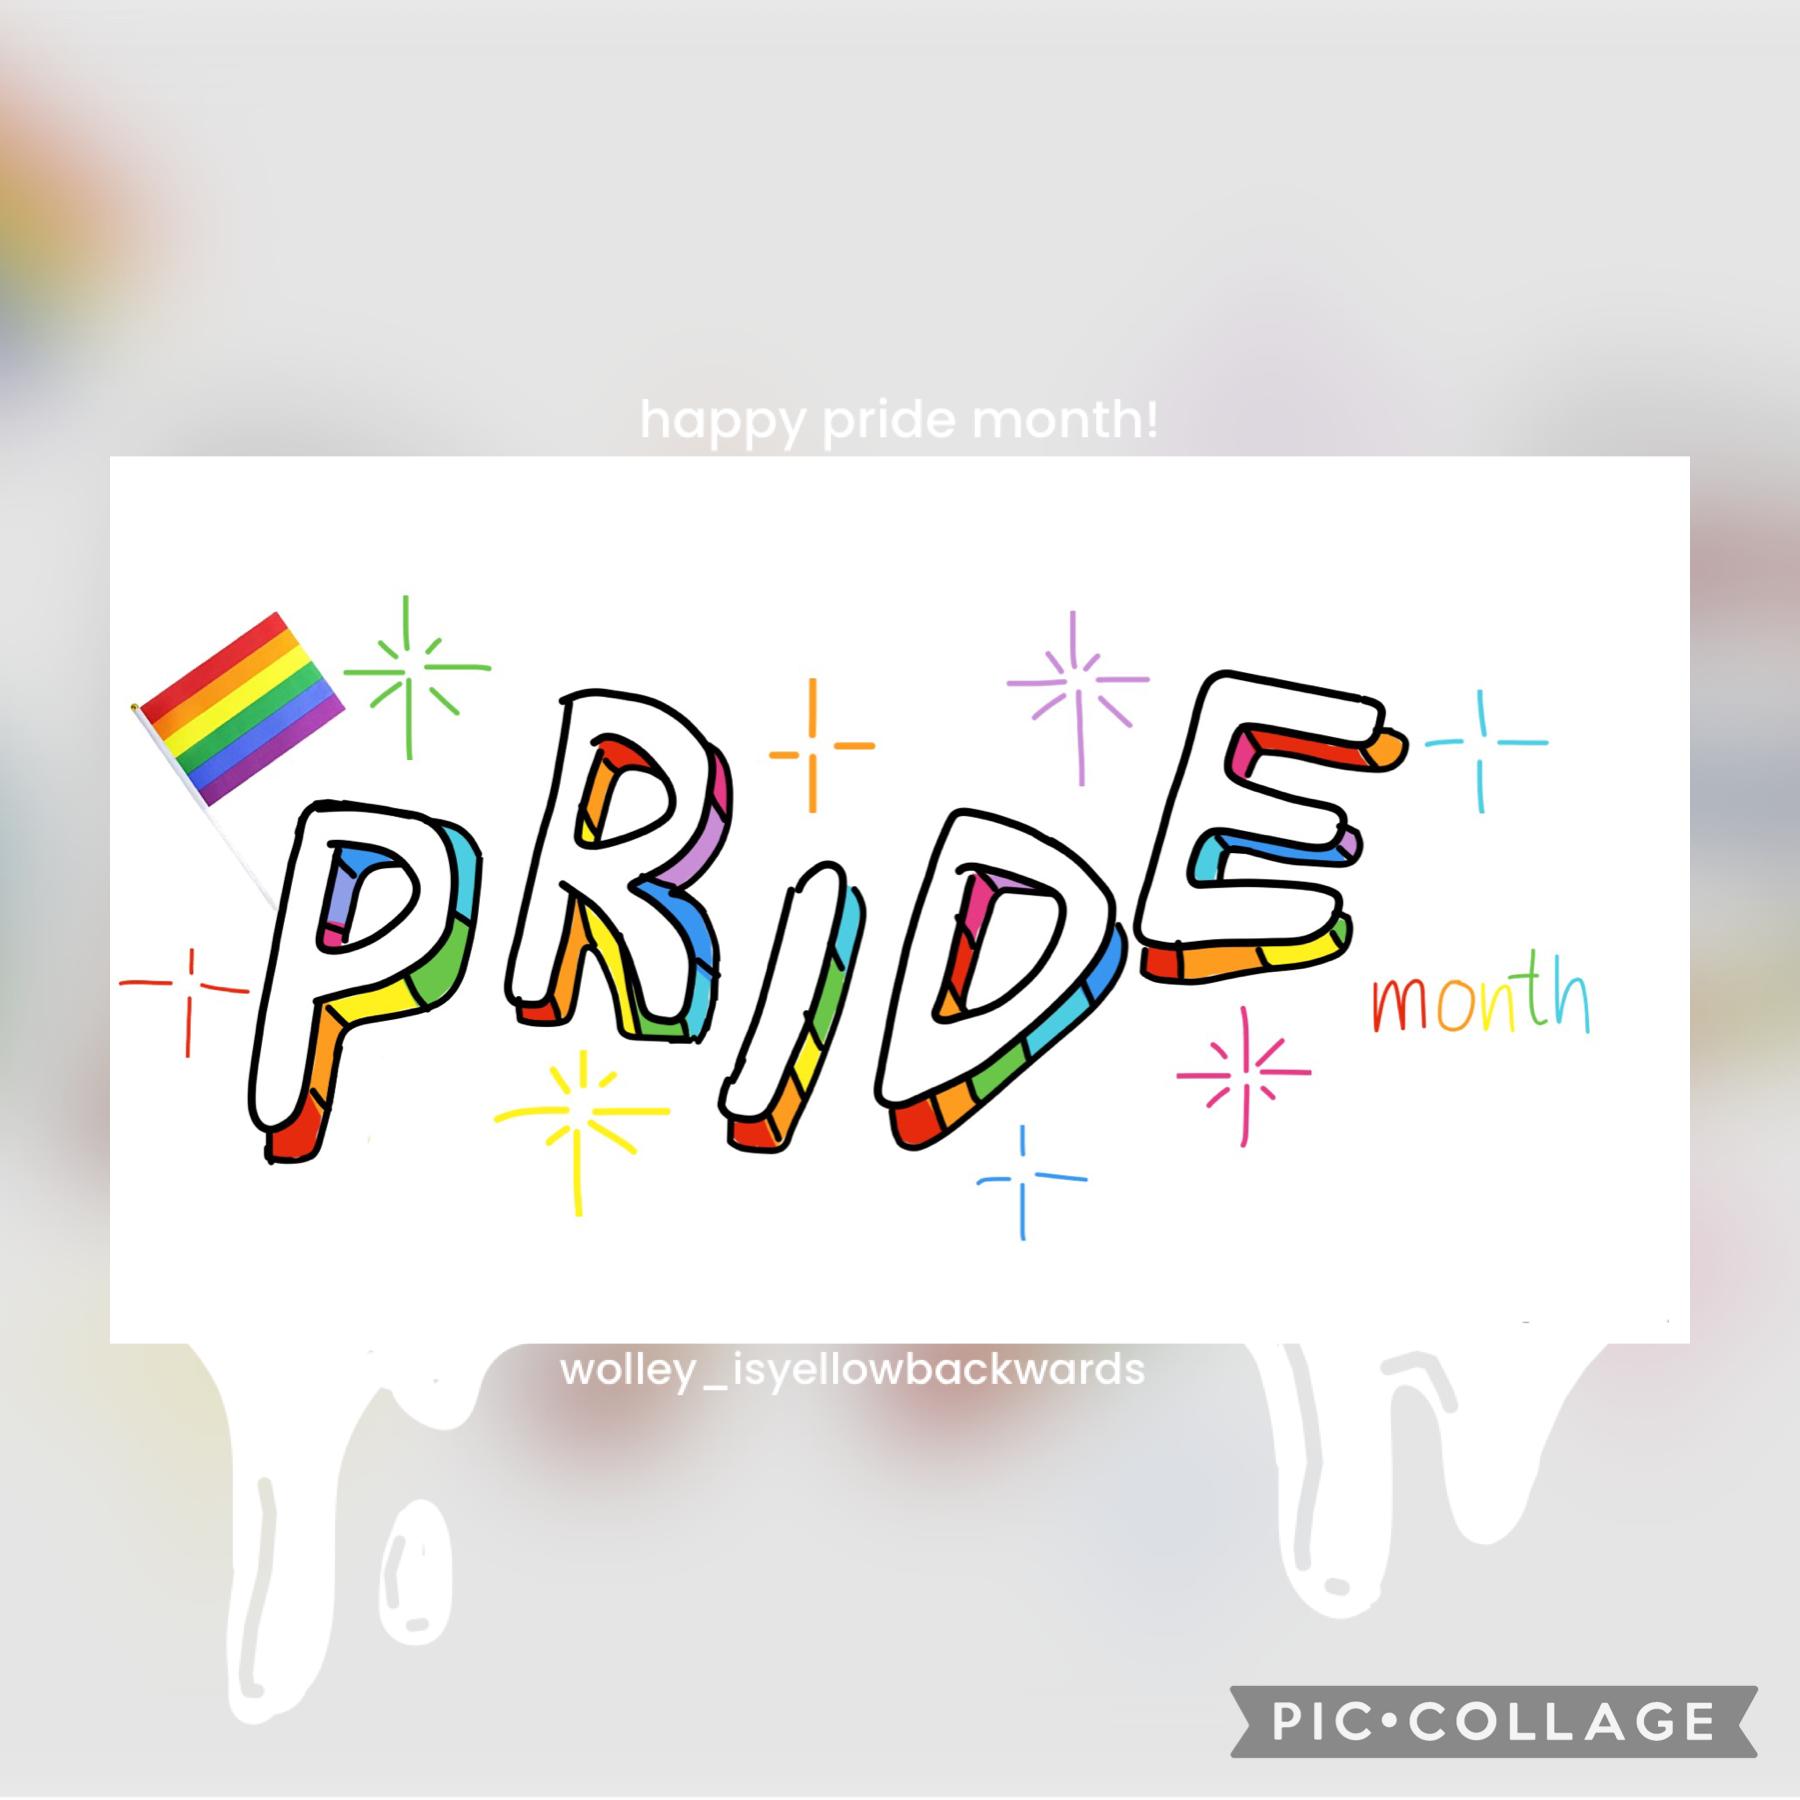 HAPPY PRIDE MONTHH! 
there are so many of you precious things part of the community out here and it’s honestly so beautiful to see everyone supporting each other 💗😫 as an ally of the LGBTQ+ community I LOVE YOU ALL 💜 I don’t care if other people tell you 